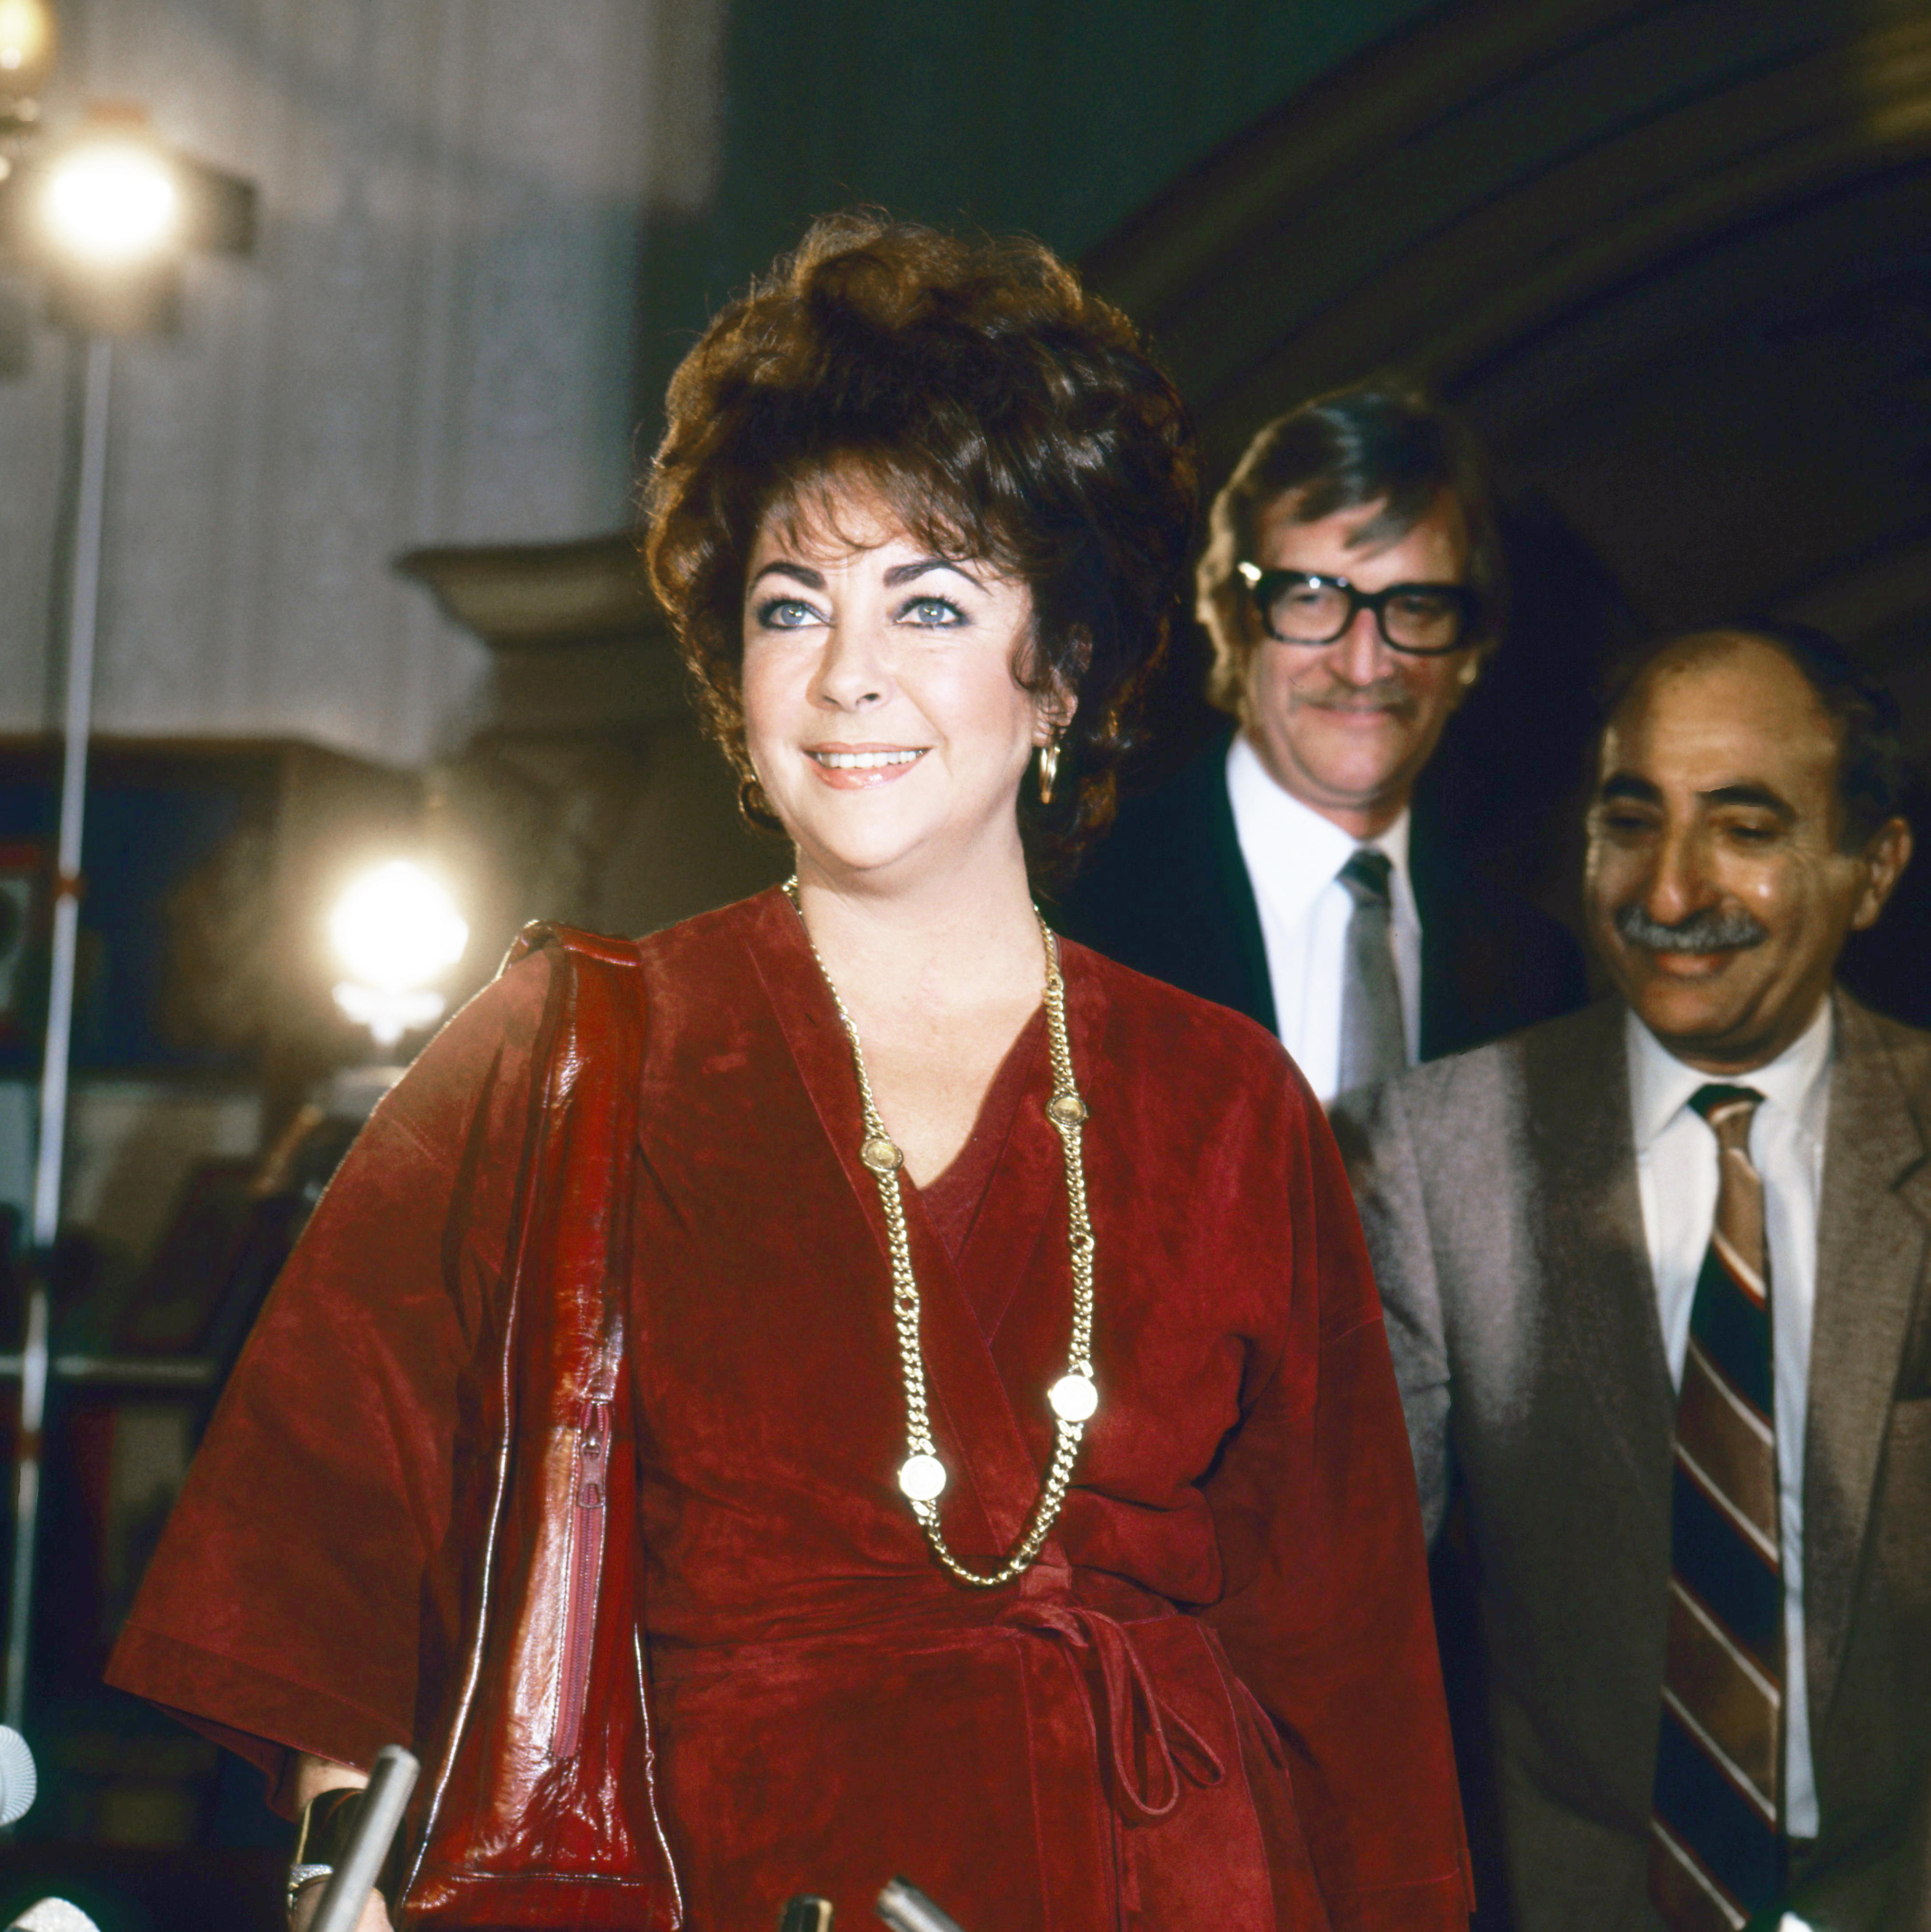 Woman in a fur coat and necklace, with two men in suits behind her